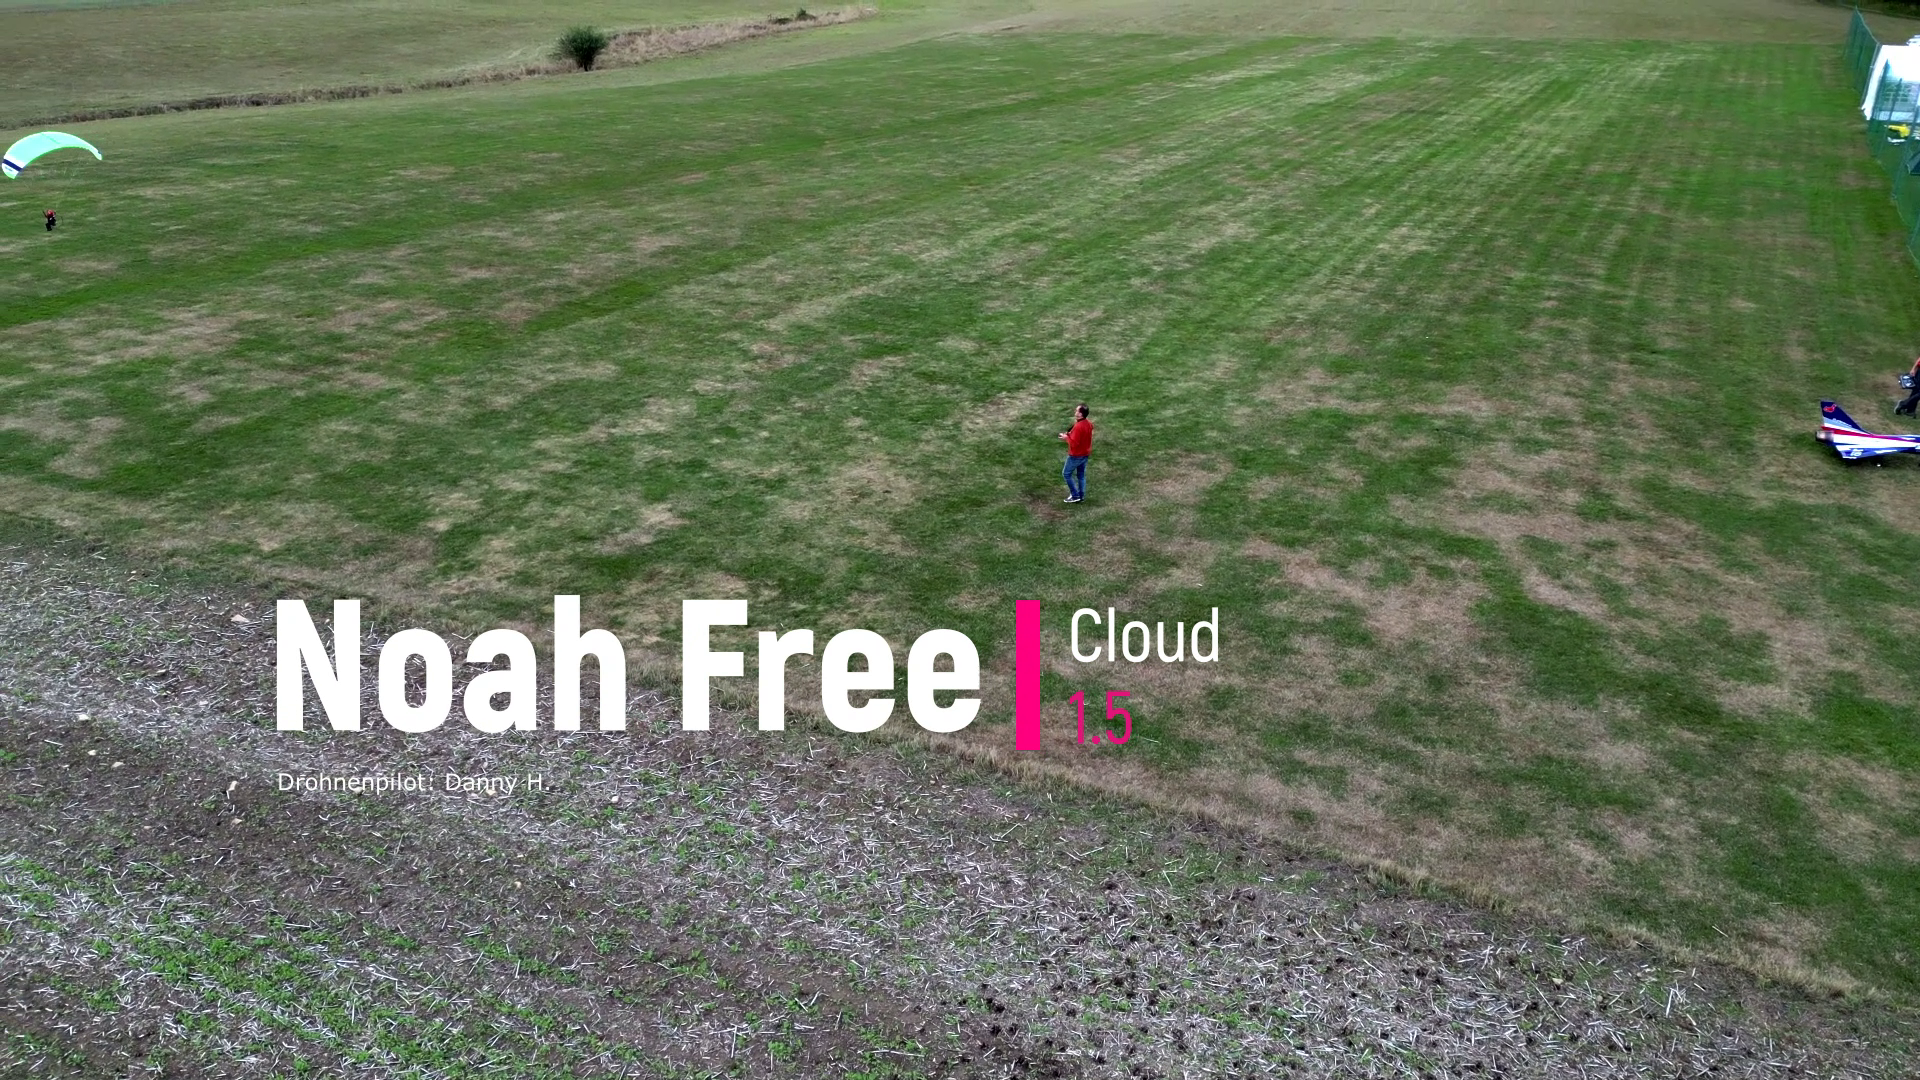 Noah Free escort with a drone